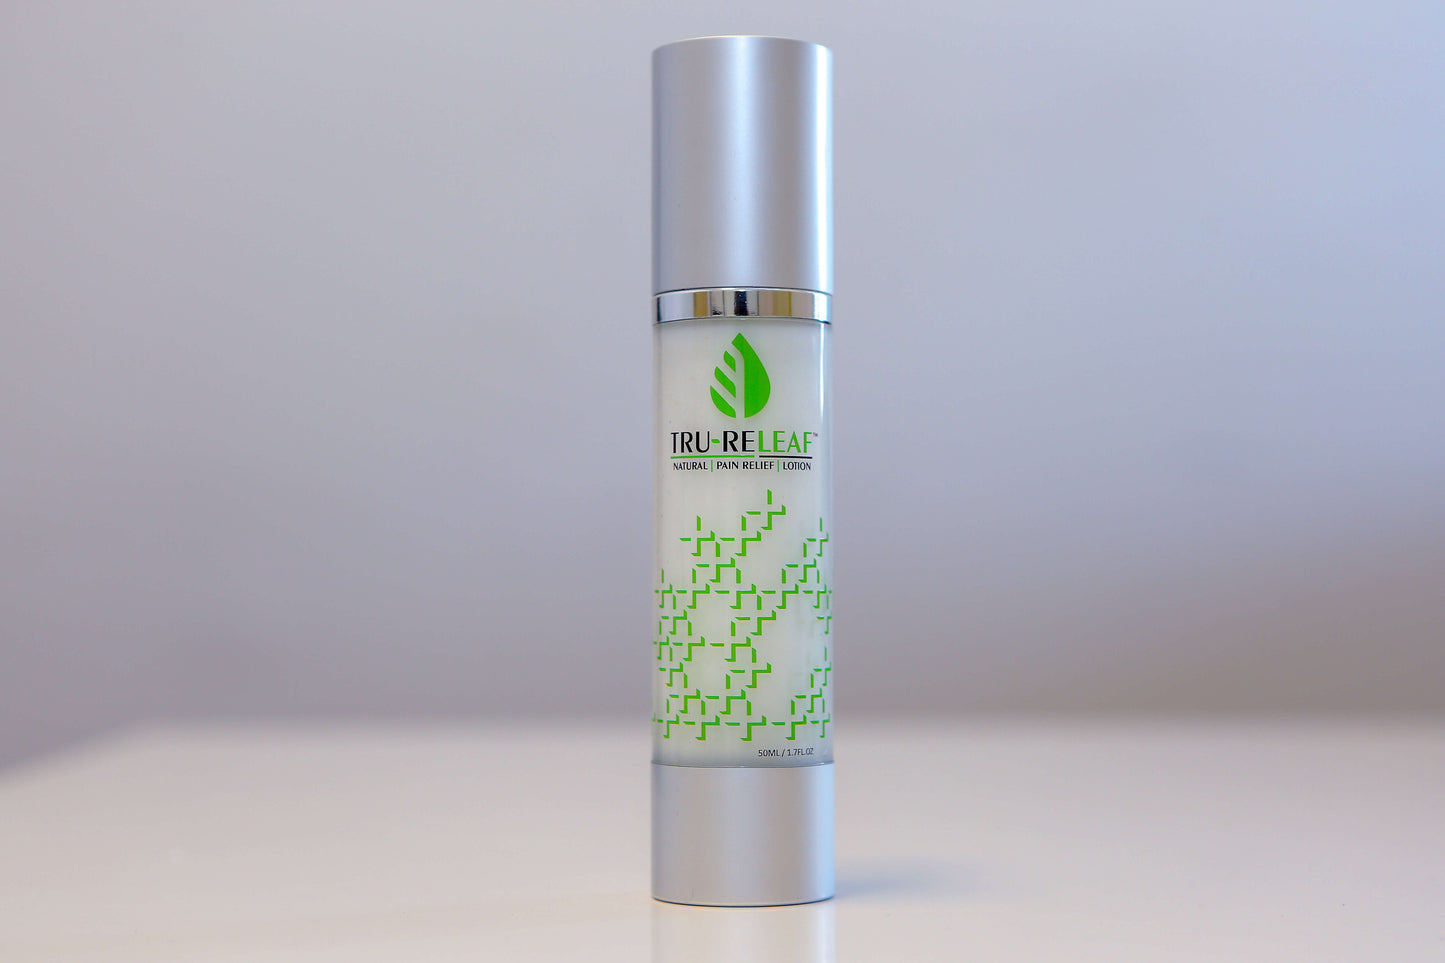 Tru-Releaf     All Natural Pain Relief Lotion     Works in Minutes, Lasts Up to 12 Hours